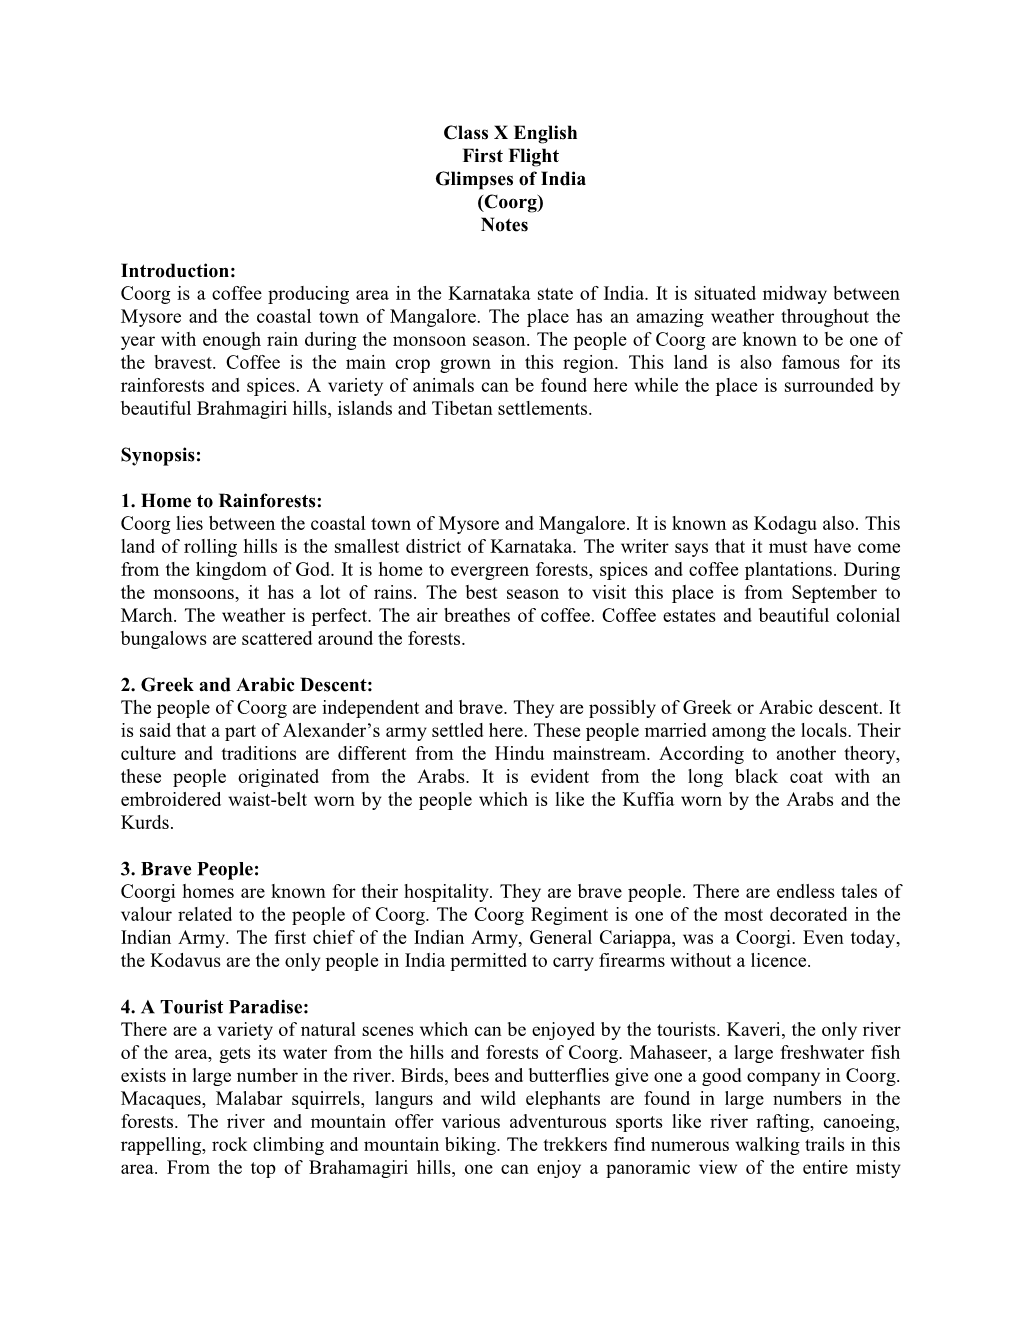 Class X English First Flight Glimpses of India (Coorg) Notes Introduction